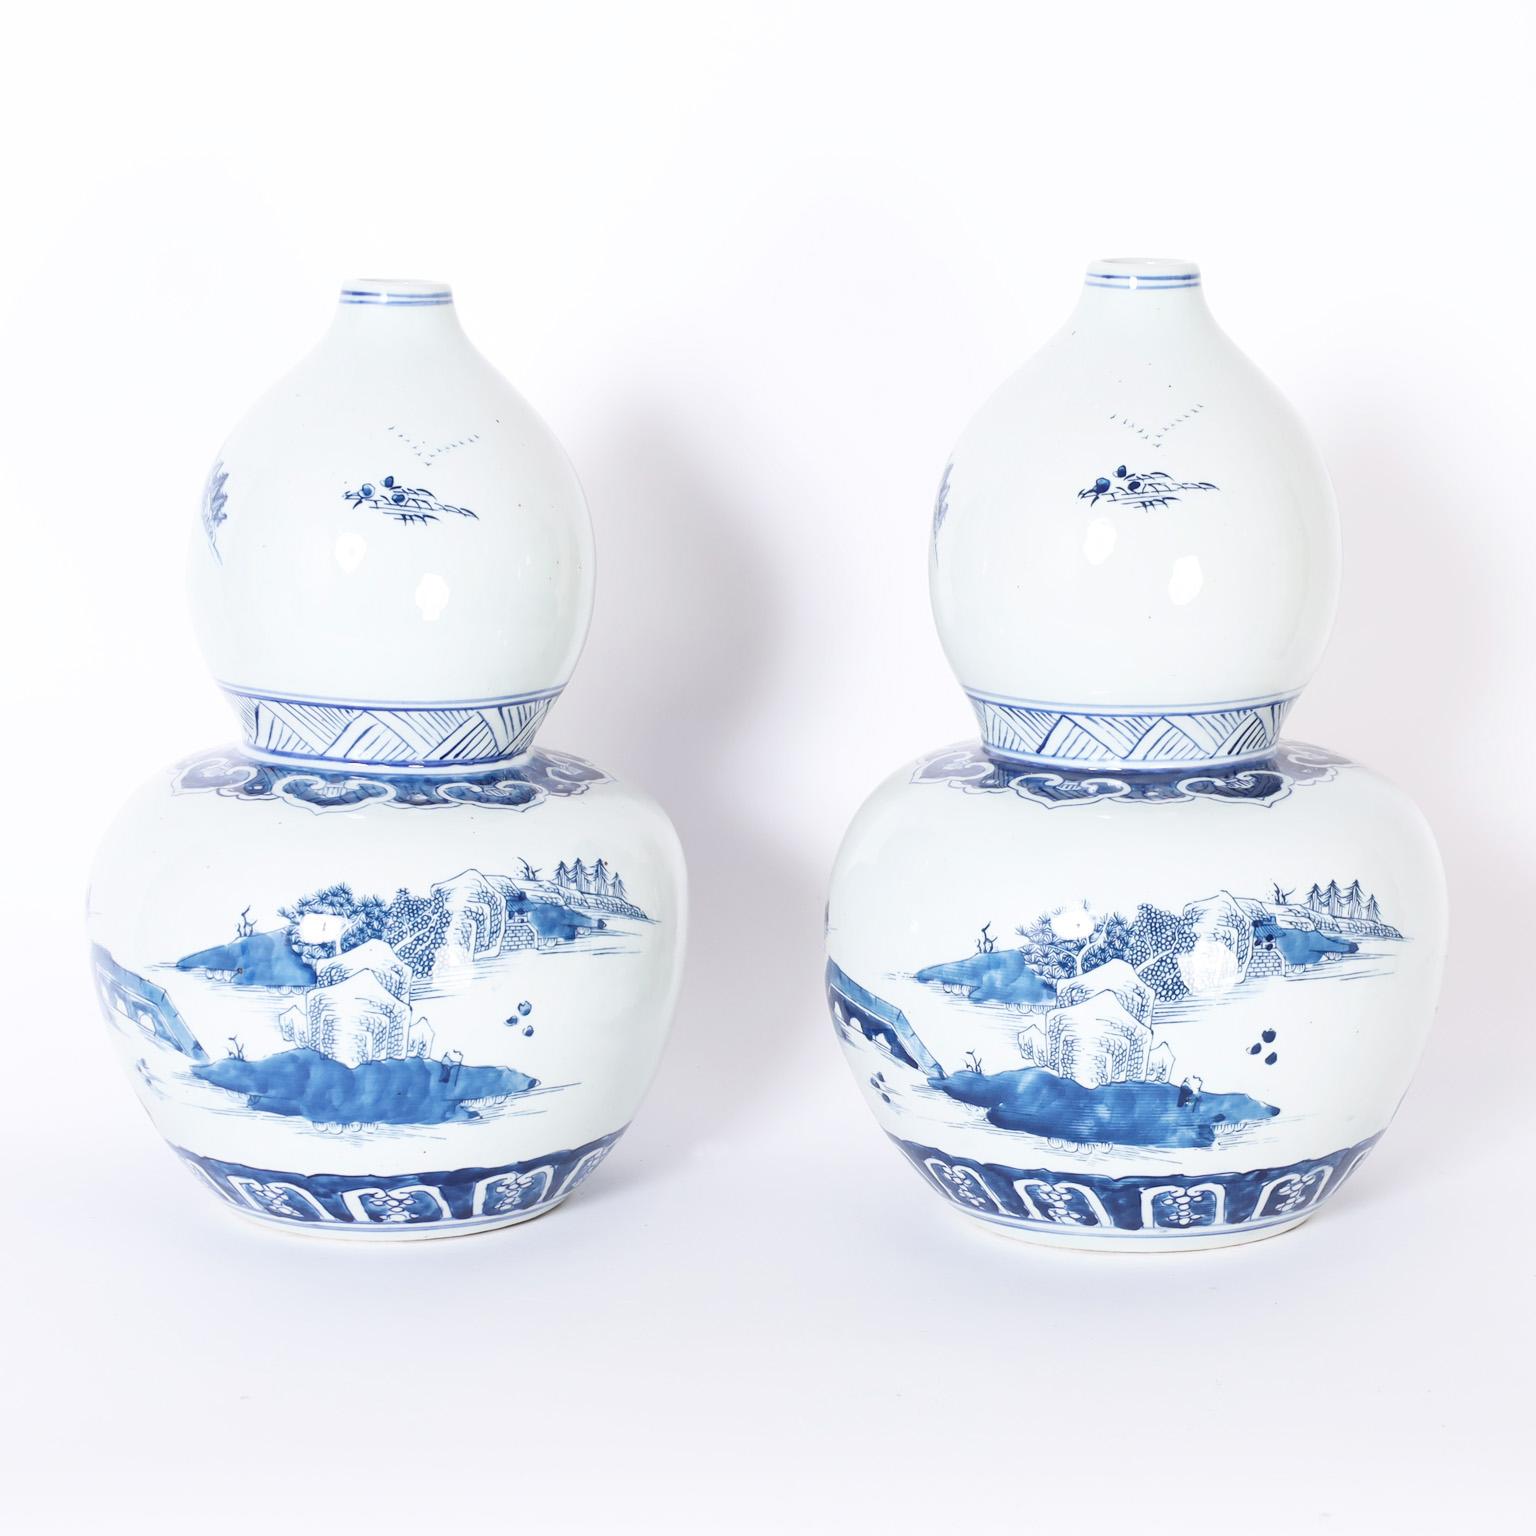 Pair of Chinese blue and white porcelain vases with a classic double gourd form hand decorated with pagodas in landscapes, in the Chinese Export manner.